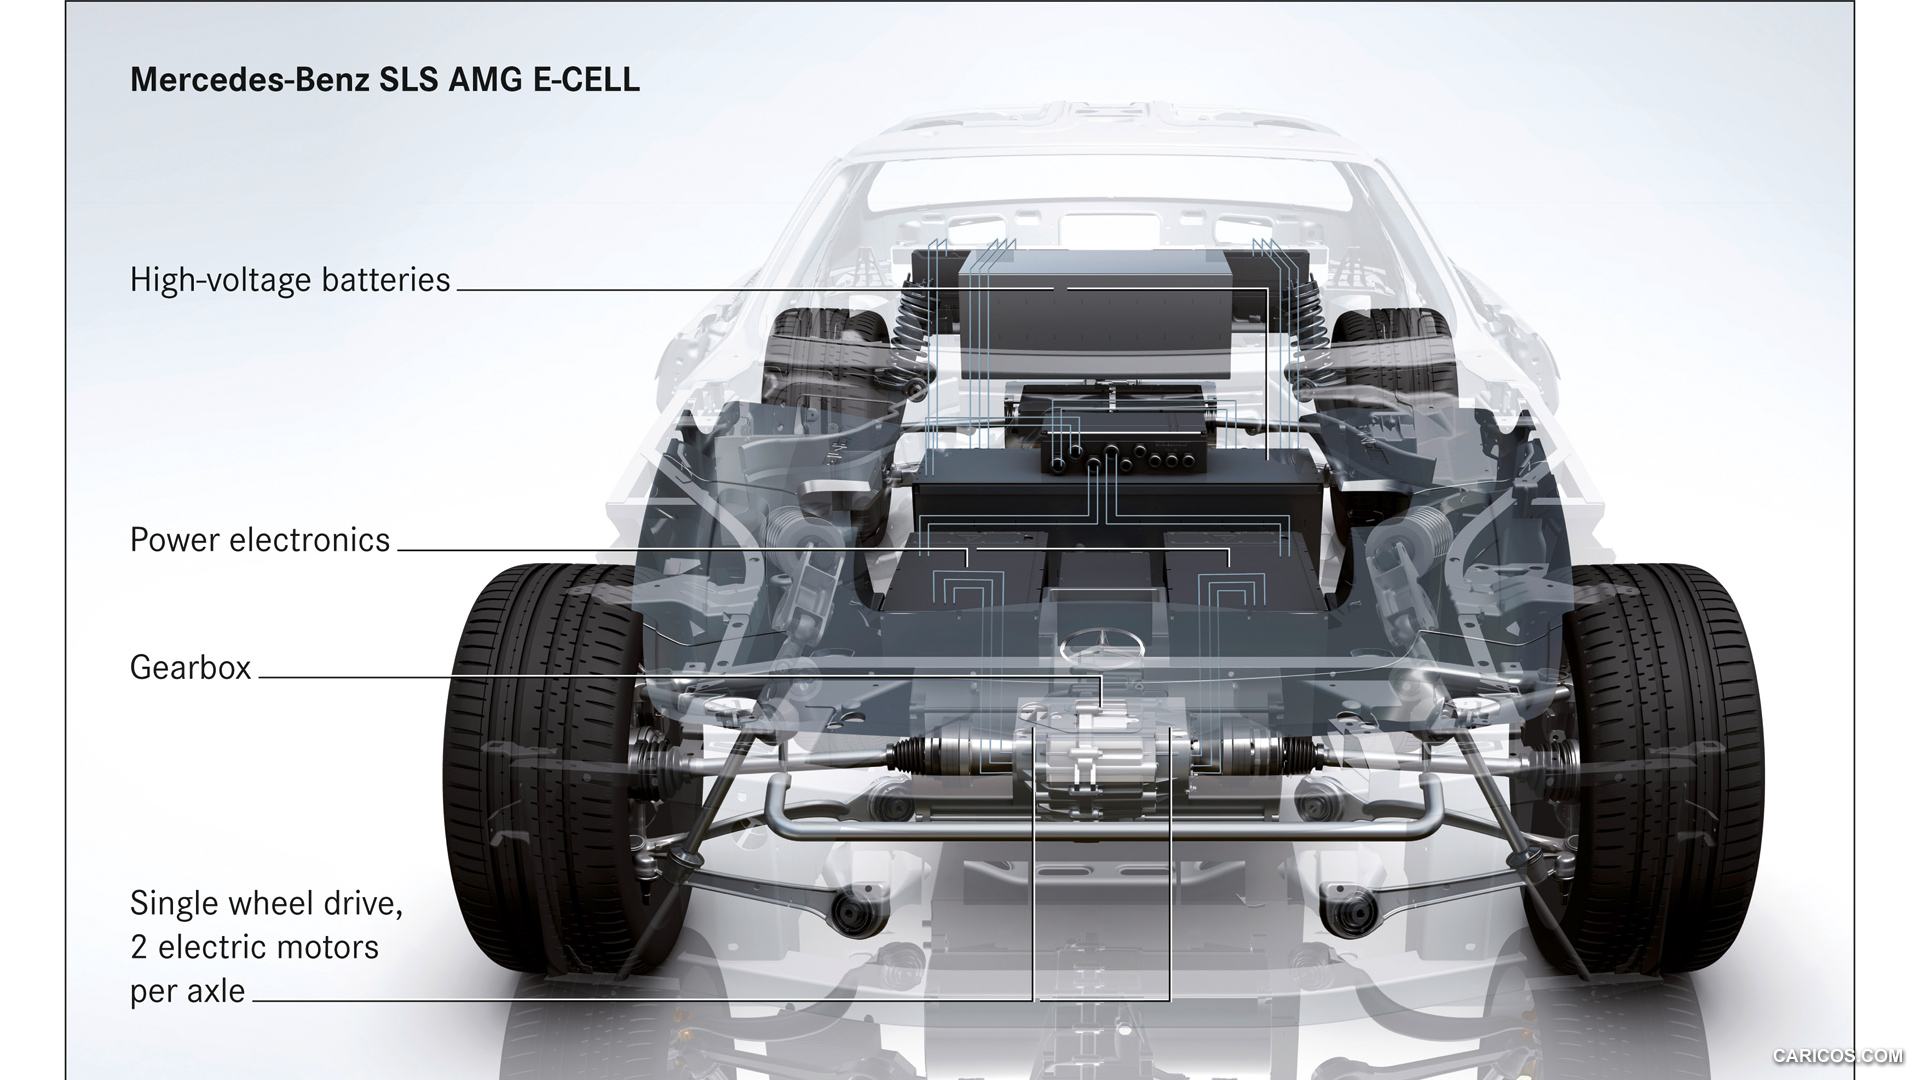 Mercedes-Benz SLS AMG E-CELL Concept  - Technical Drawing, #57 of 60